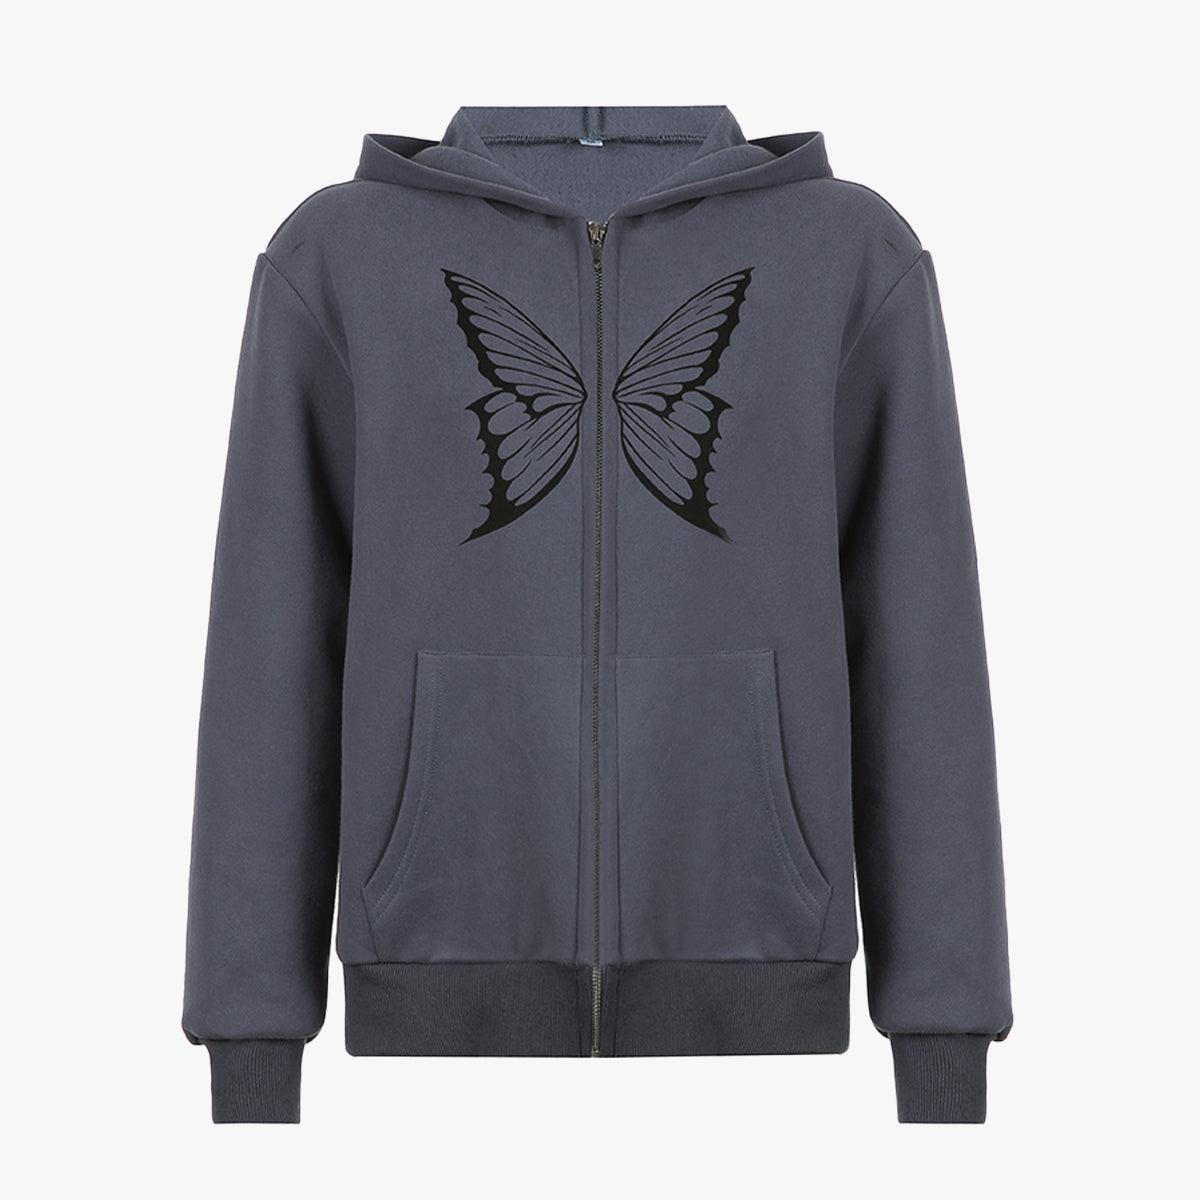 Butterfly Aesthetic Horned Hoodie - Aesthetic Clothes Shop